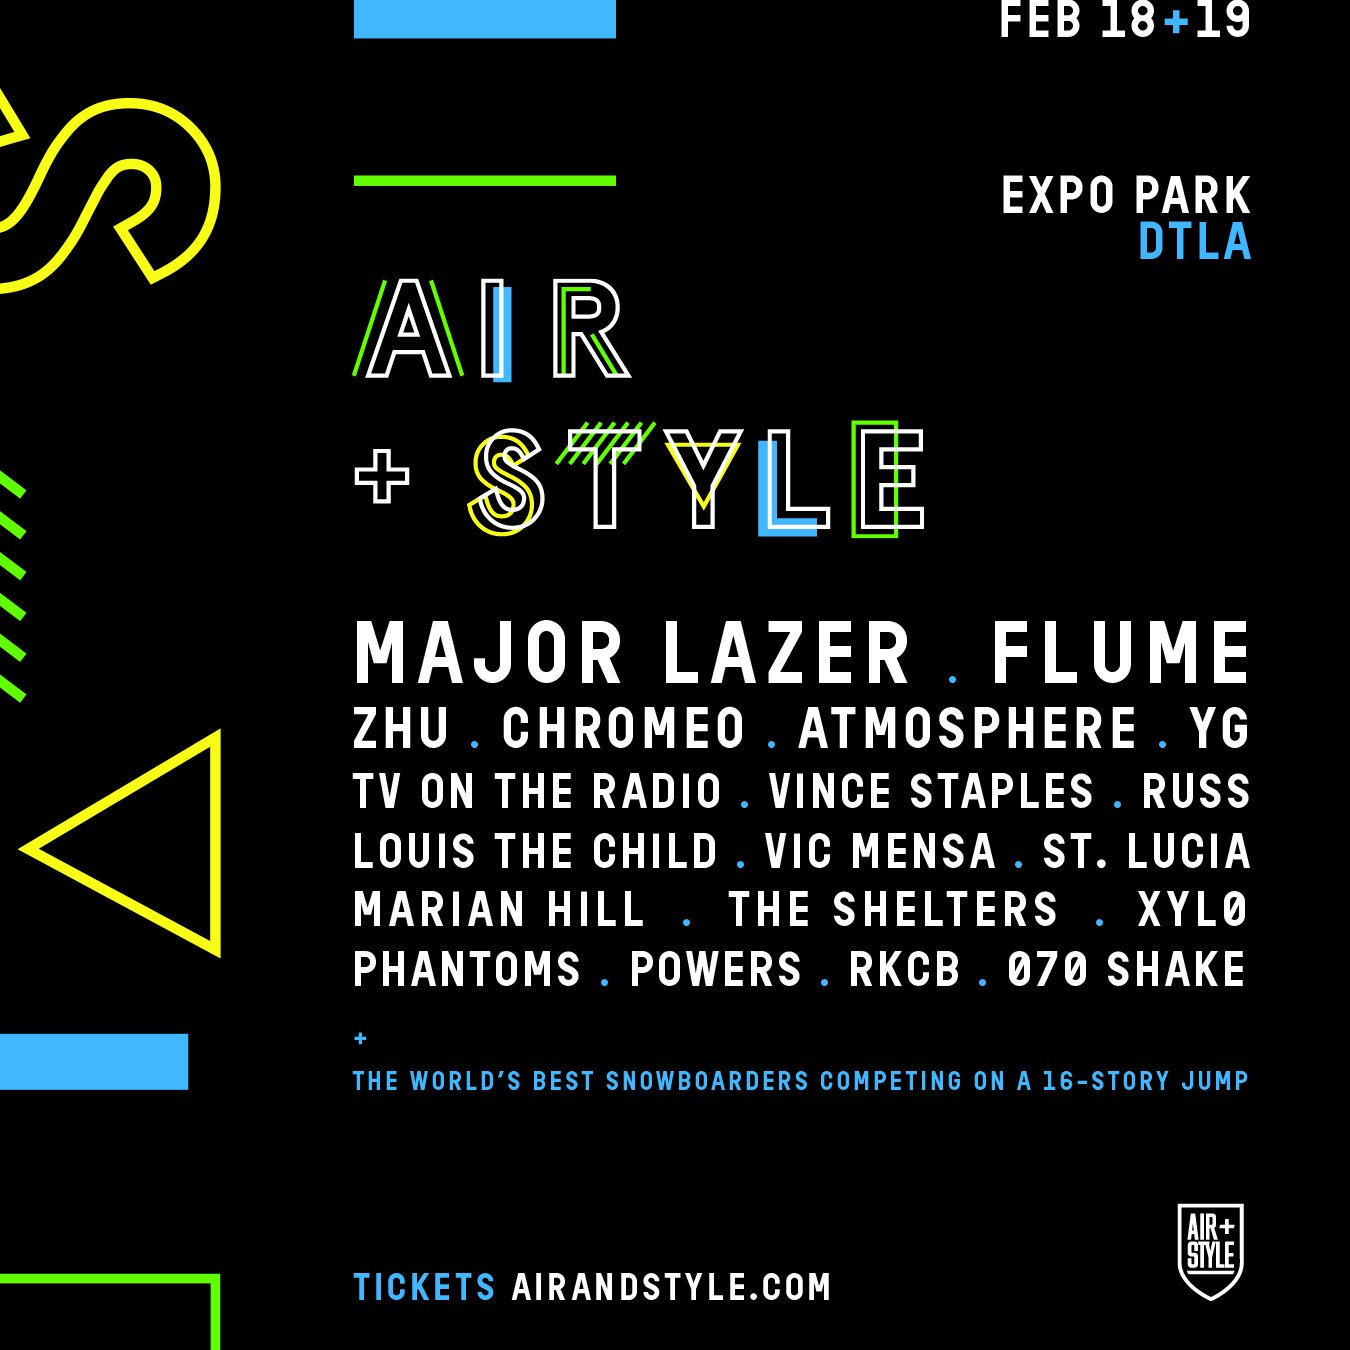 Air + Style Los Angeles. Photo by: Air + Style / Twitter